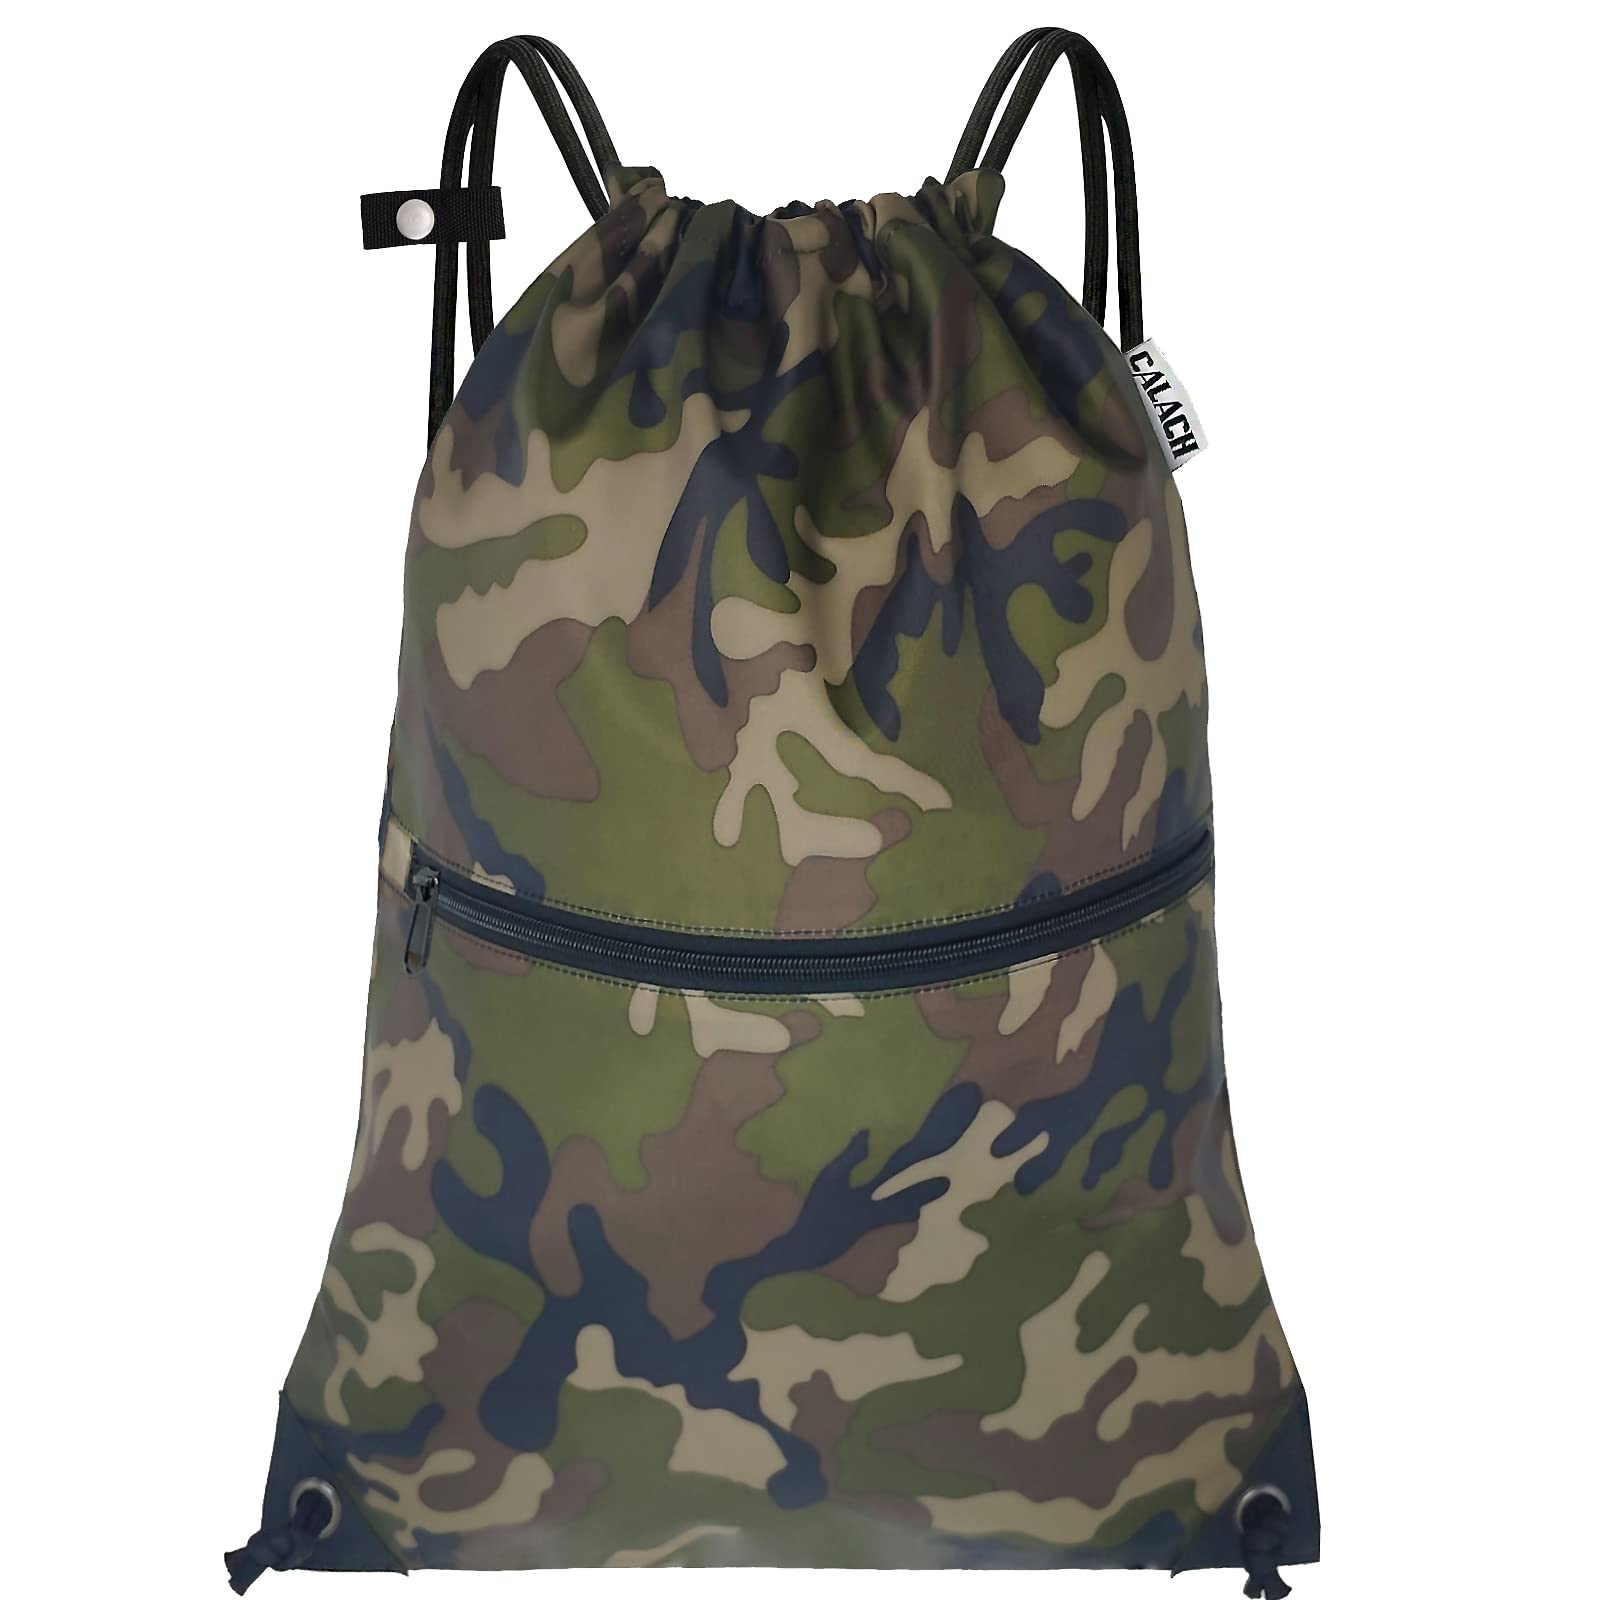 Drawstring Backpack Sports Gym Bag With Multi Pockets (Army Green Camo) HLC004